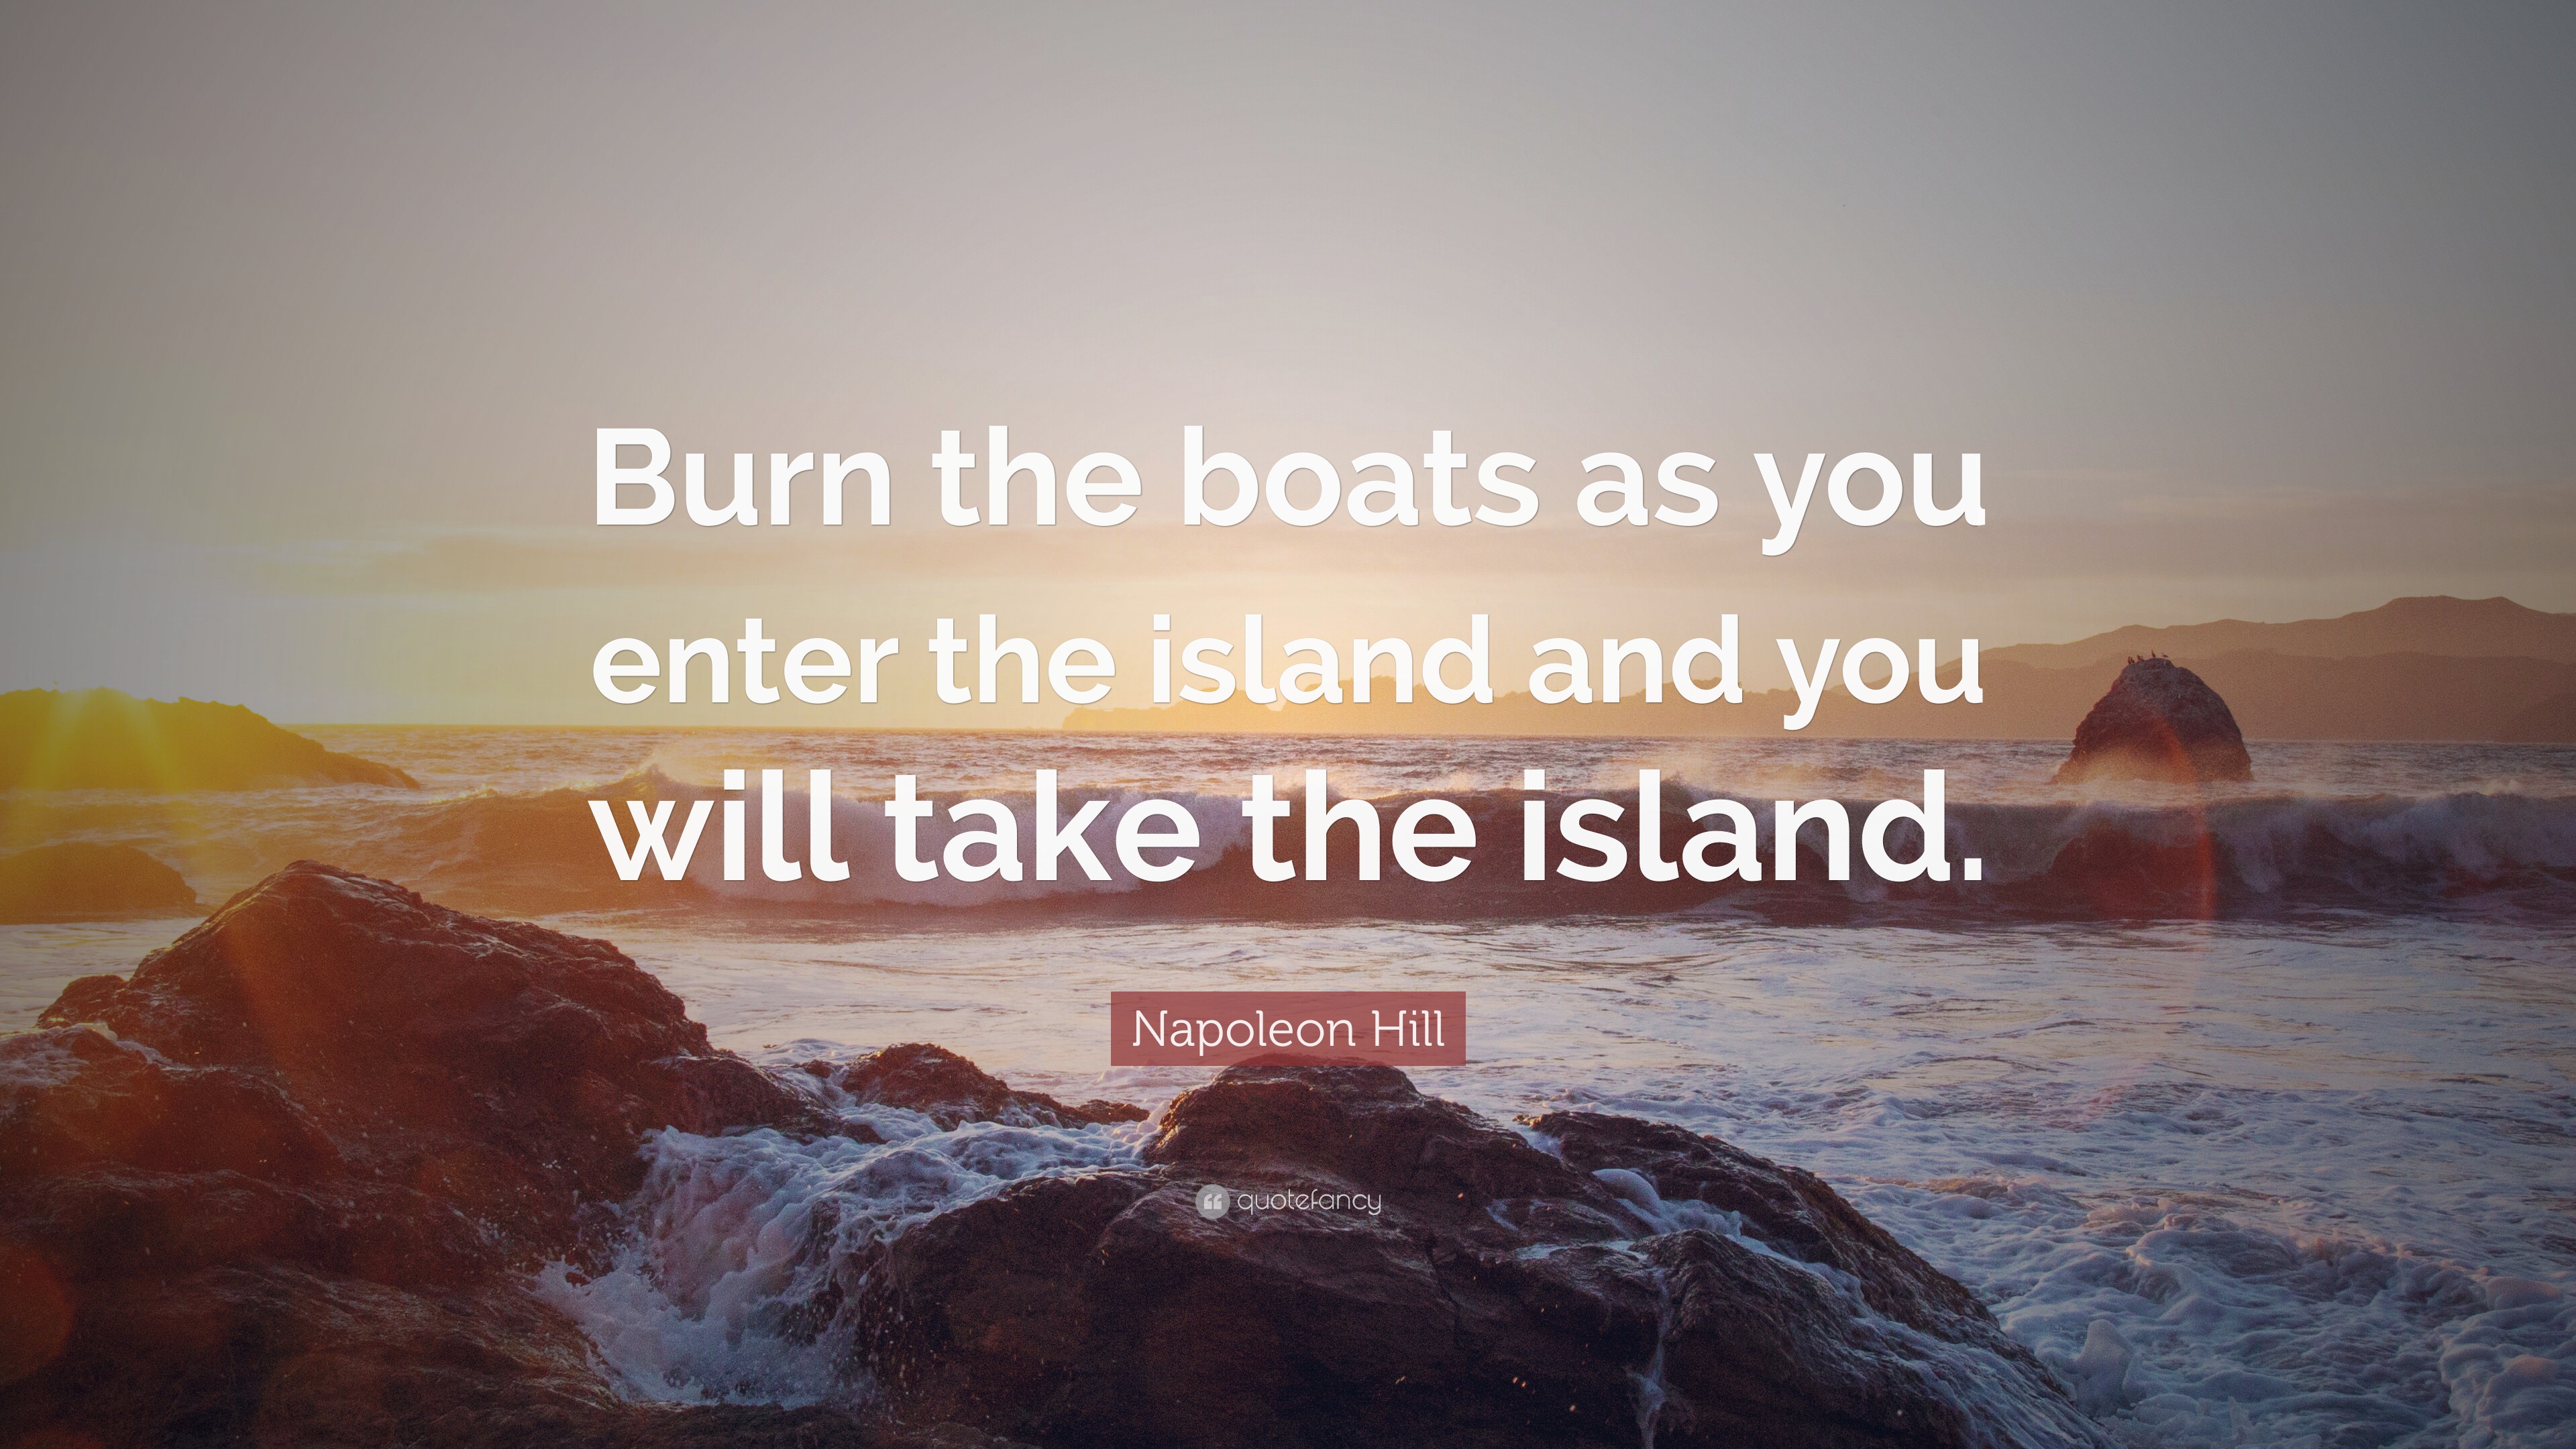 Napoleon Hill Quote Burn the boats as you enter the island and you will  take the